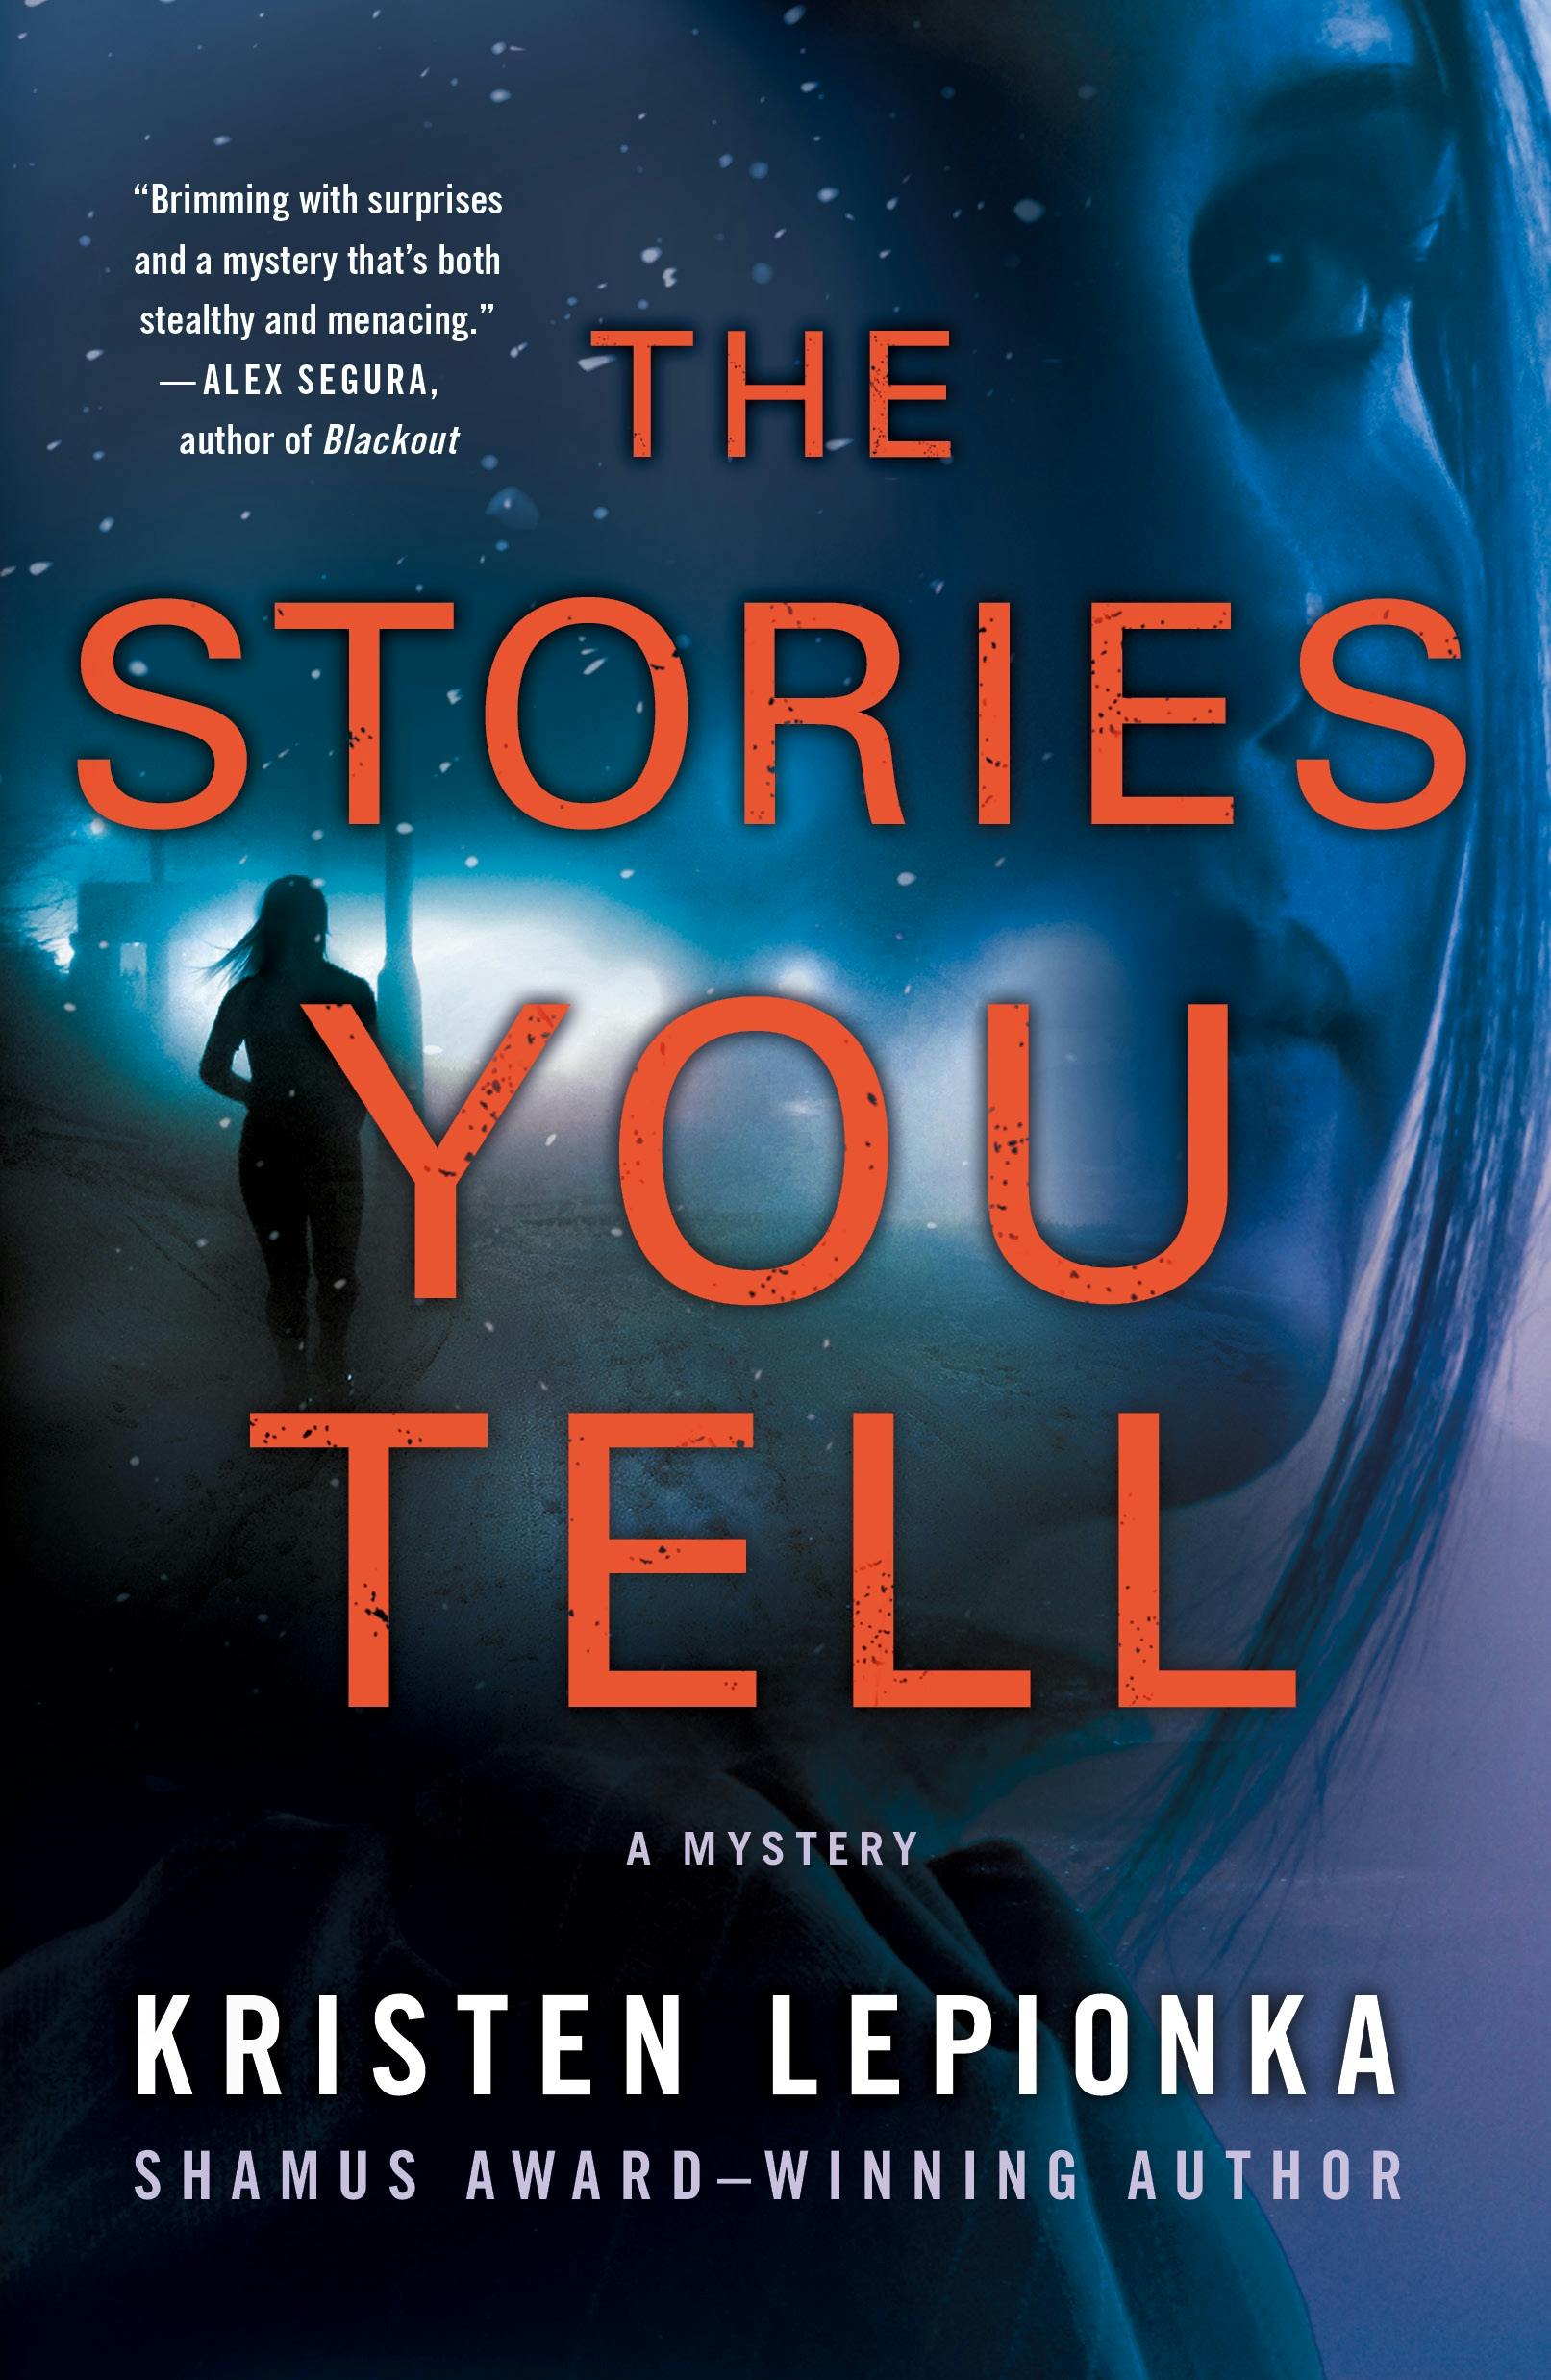 Image of The Stories You Tell